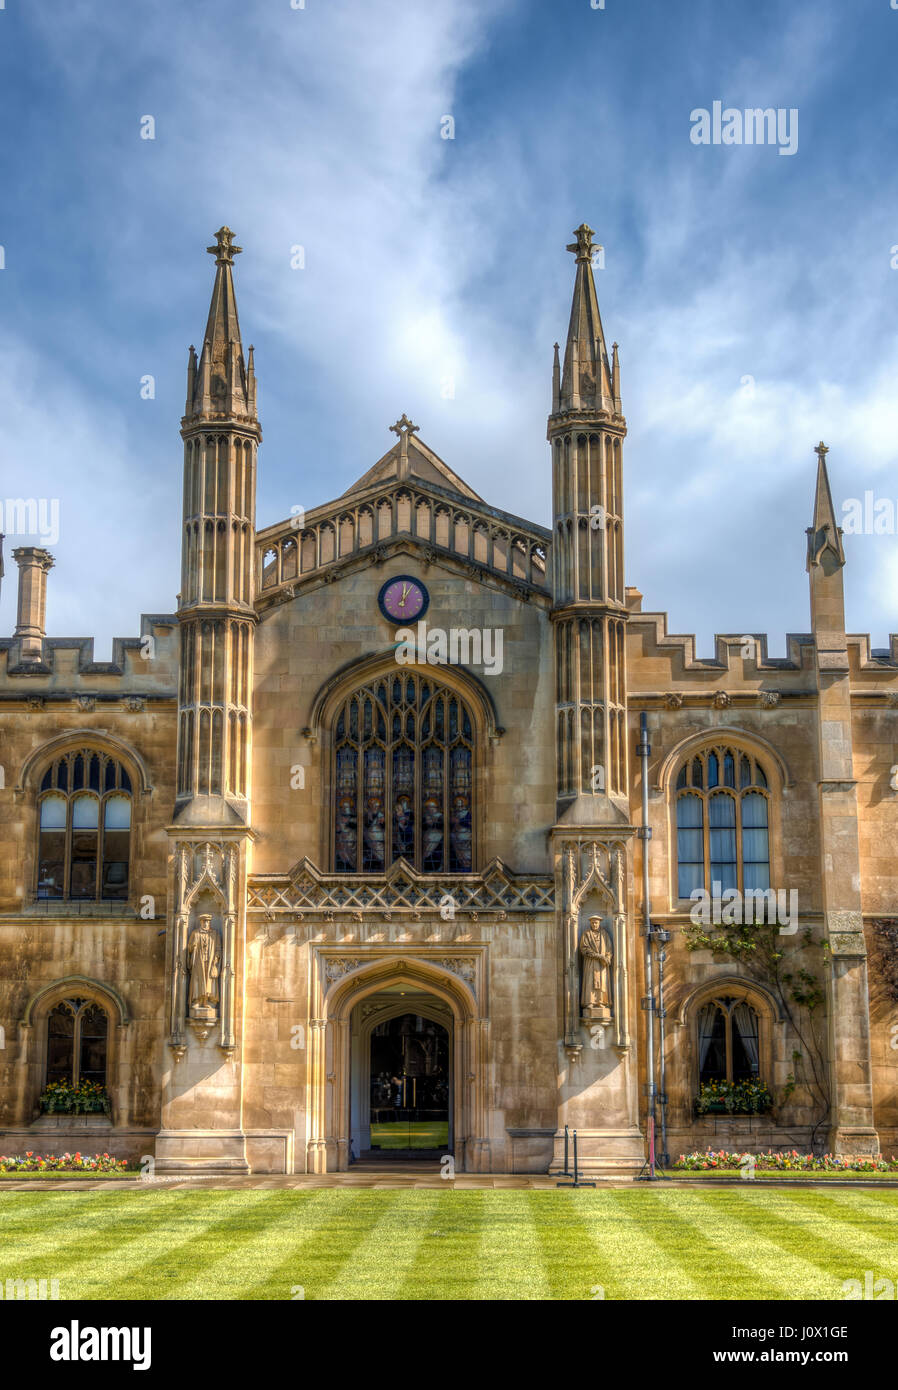 Cambridge, UK - March 27, 2016: The entrance of the Corpus Christ college in cambridge Stock Photo